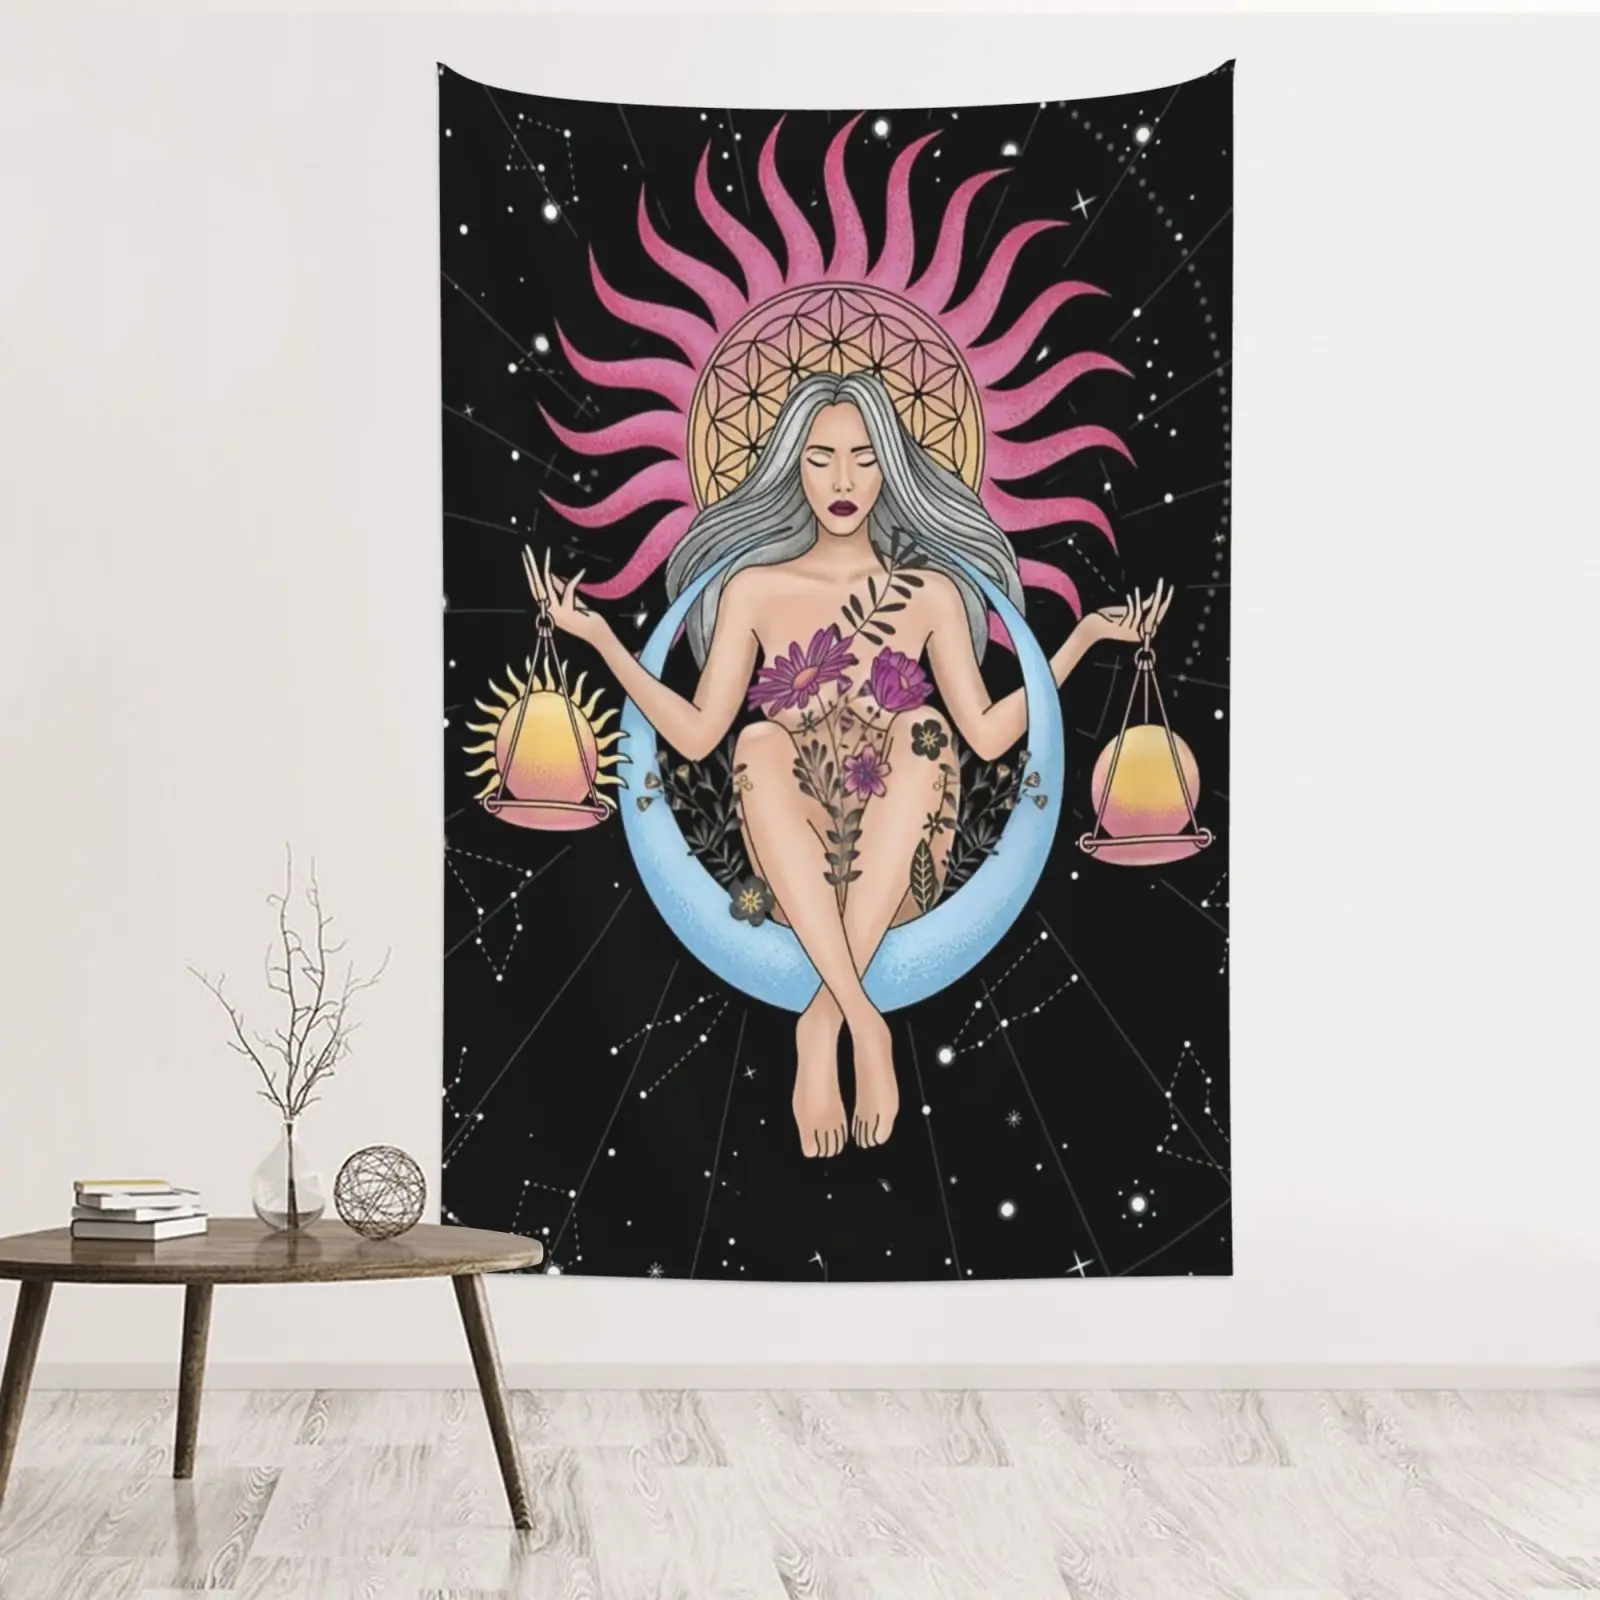 

Indian Moon Phase Girl Mandala Tapestry Wall Hanging Boho Psychedelic Bedroom Girl's Kawaii Room Dorm Hippie Witchcraft Decor